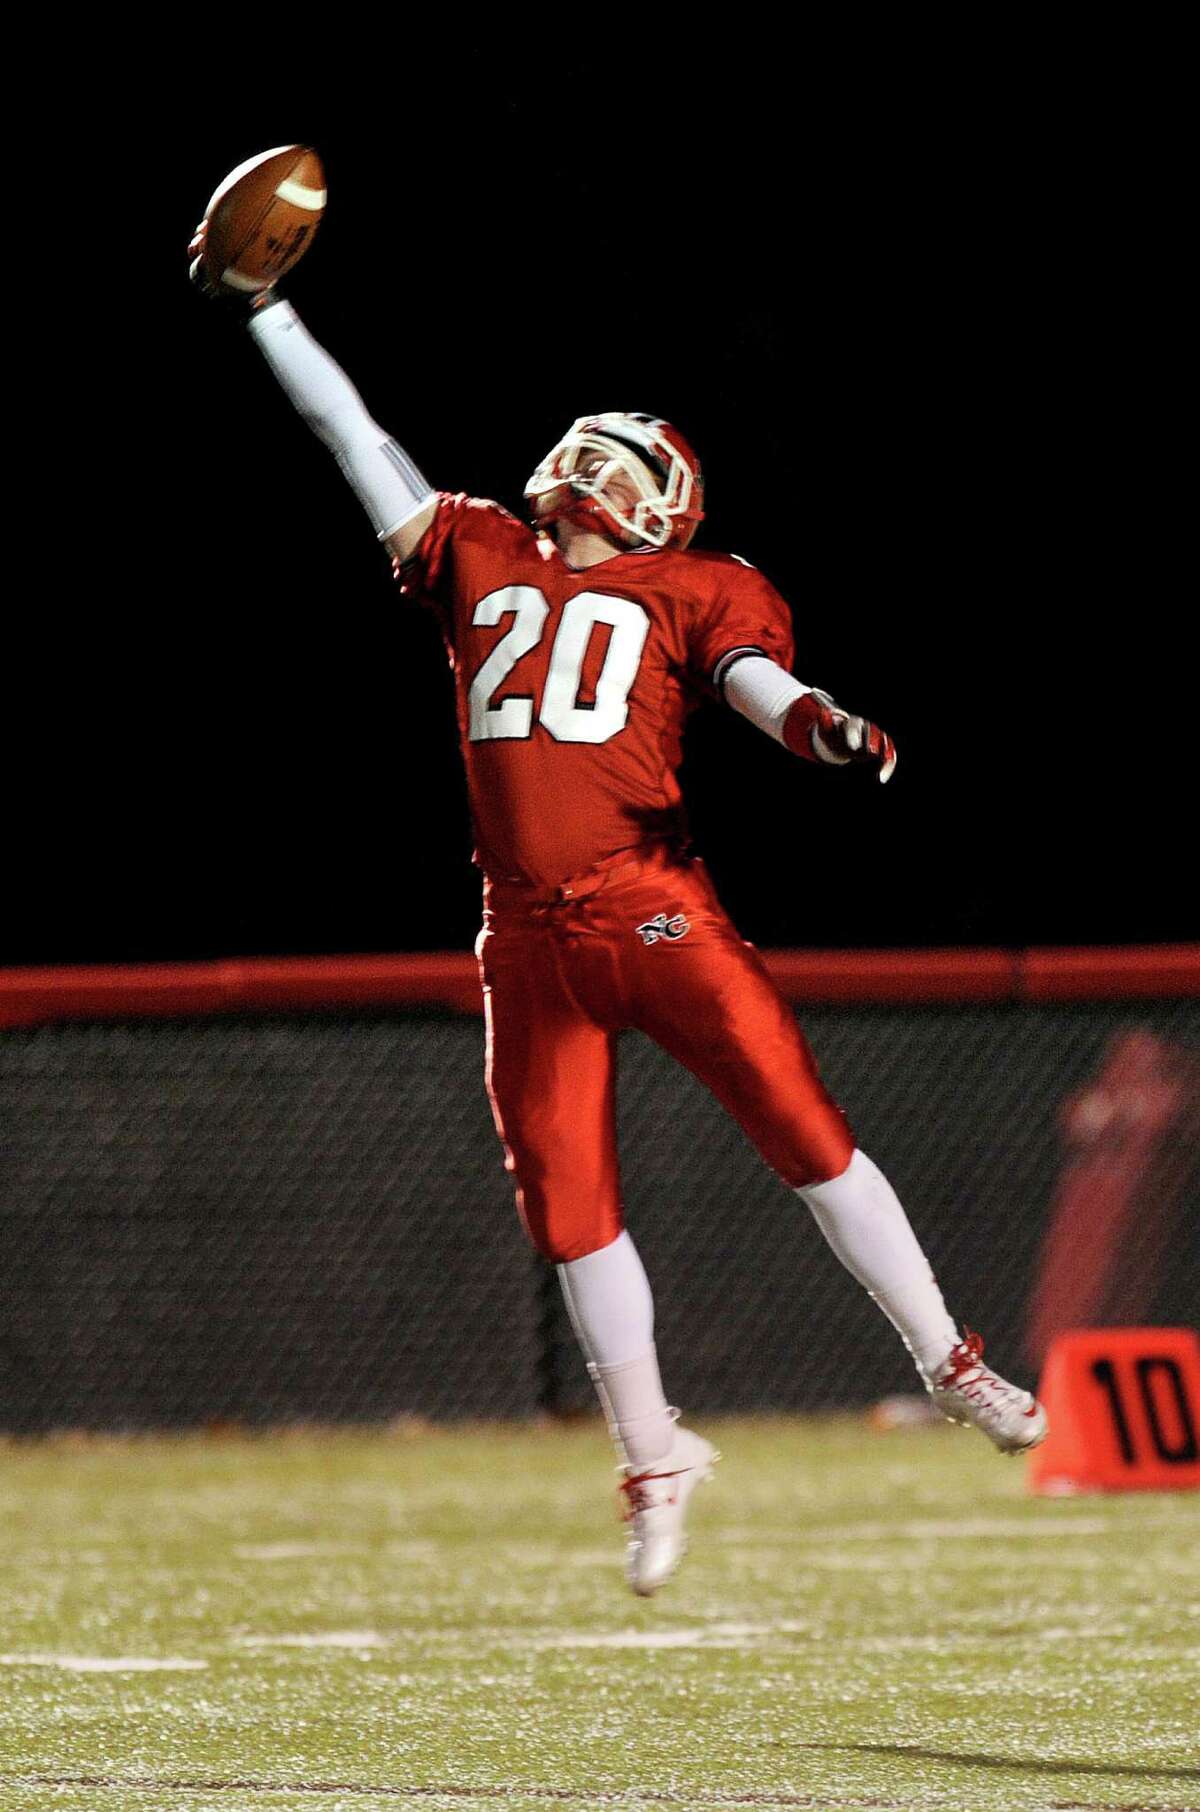 New Canaan's Andrew Read makes a one-handed catch during Friday's football game against Stamford at New Canaan High School on November 9, 2012.